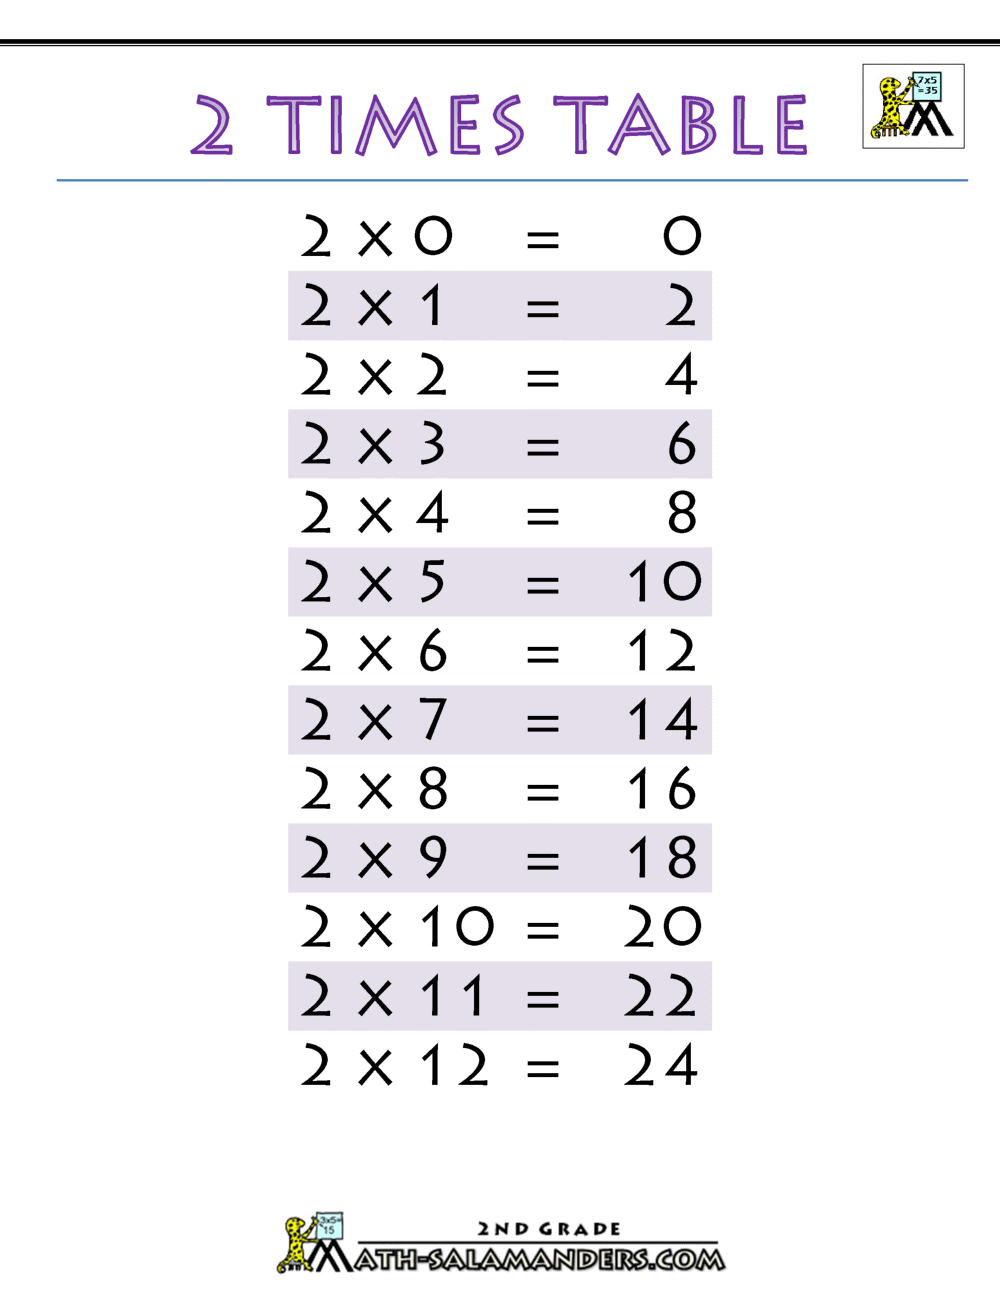 multiplication table of 2 up to 100